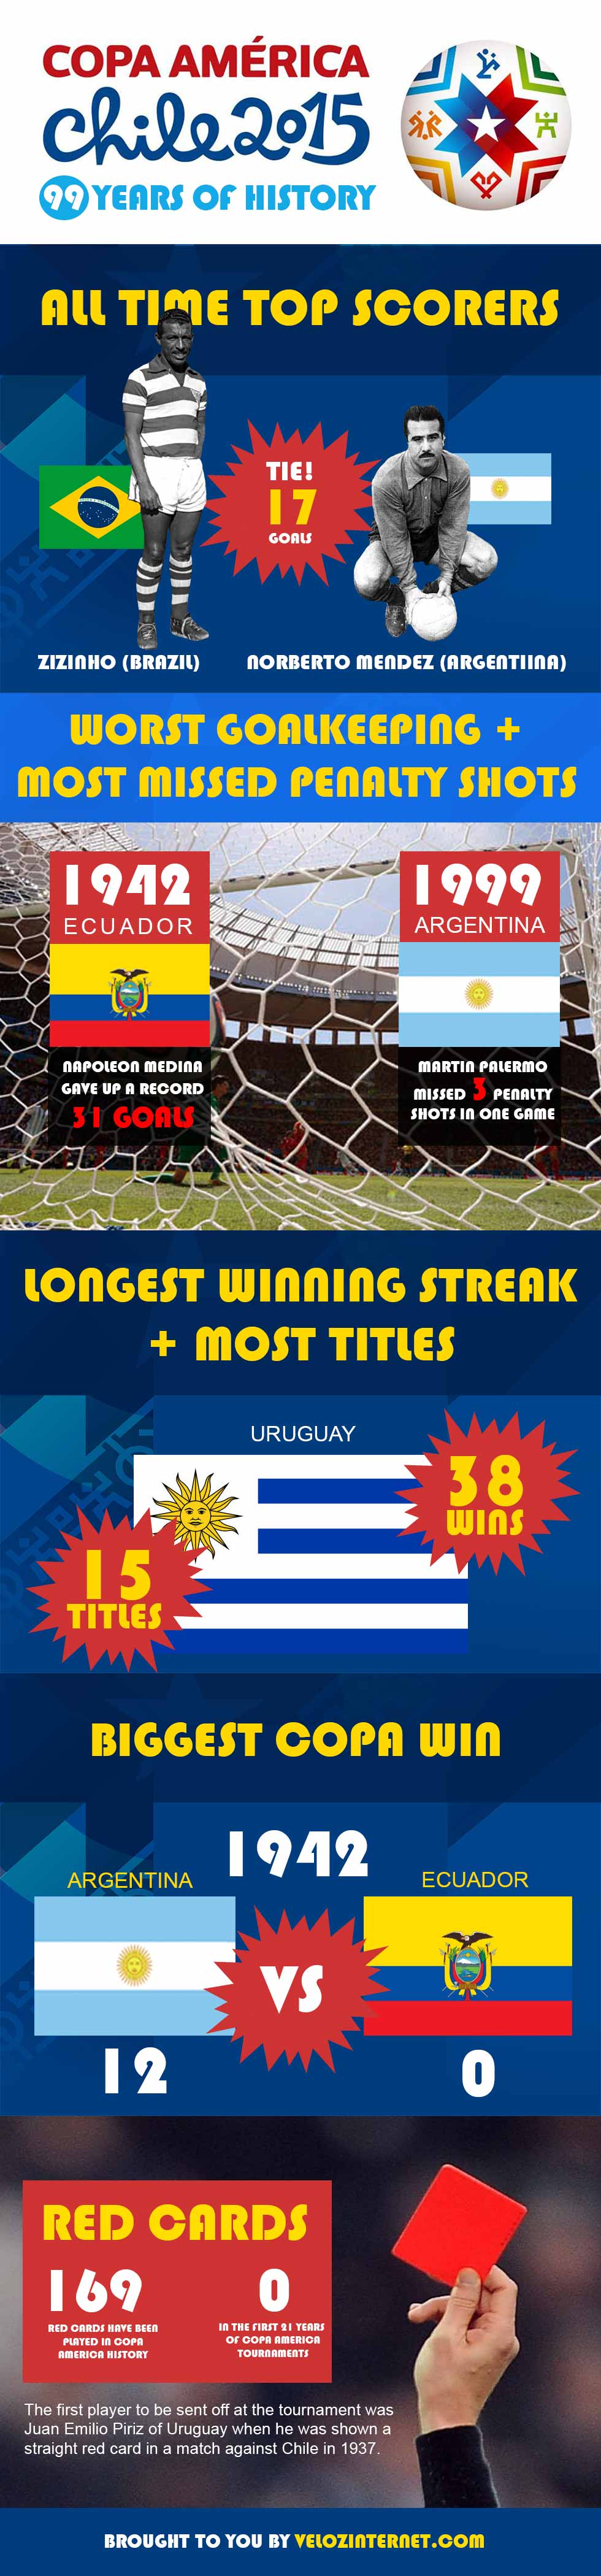 Copa America Facts - 2015 INFOGRAPHIC 